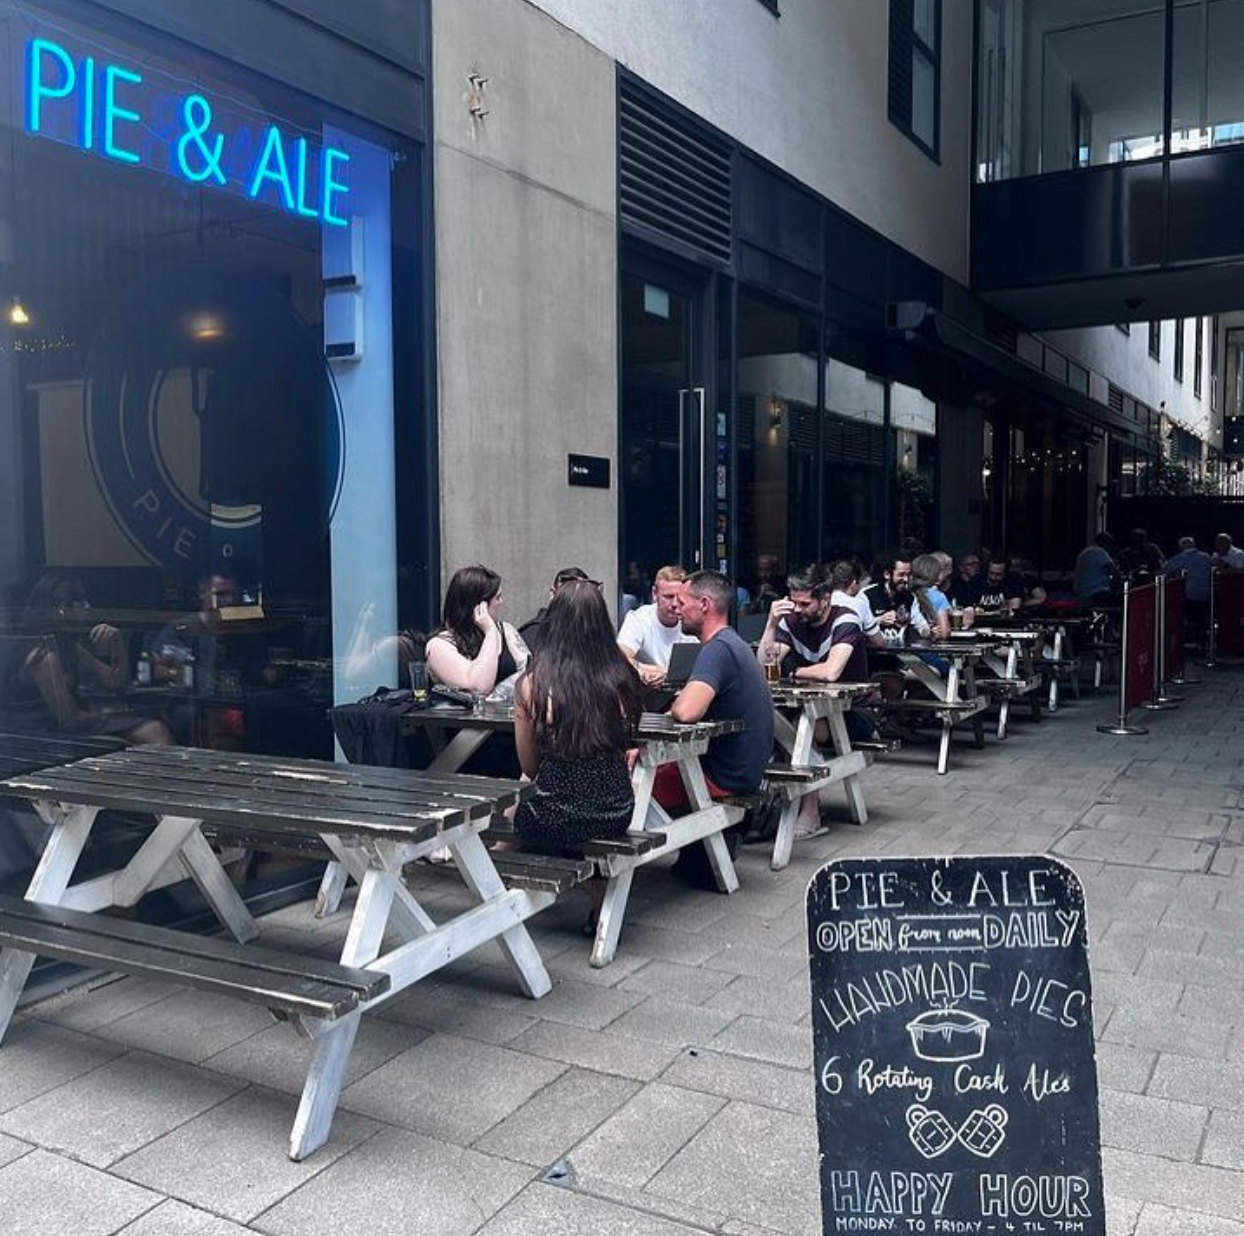 does pie and ale show sport?